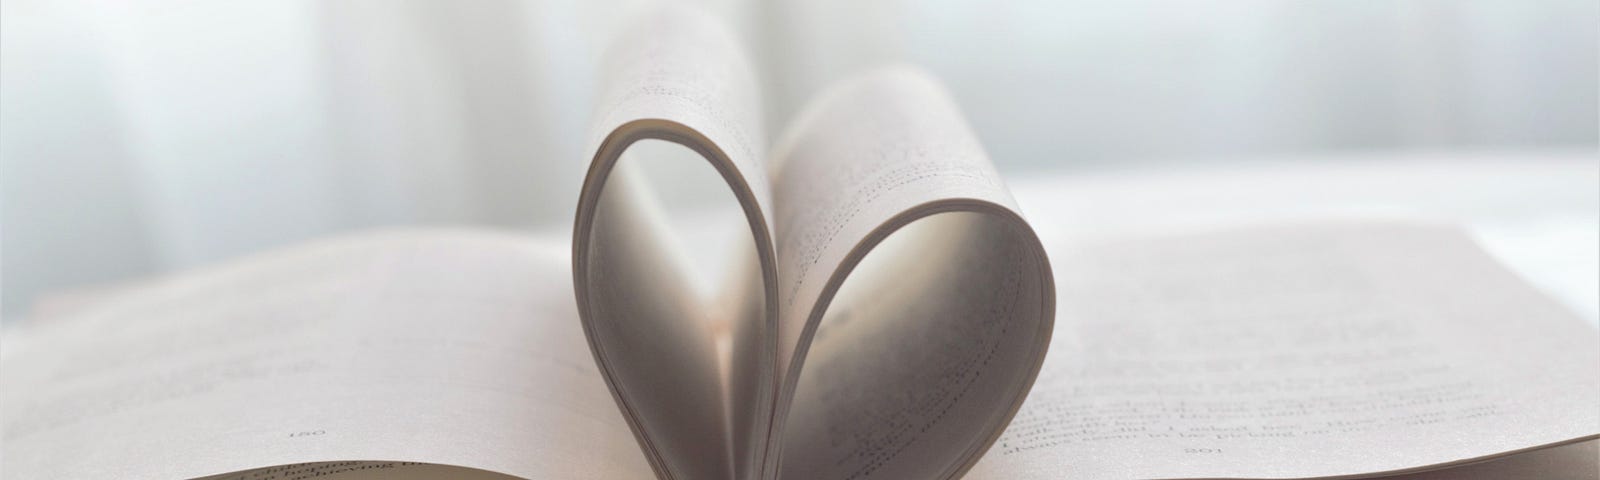 Pages in an open book shaped like a heart